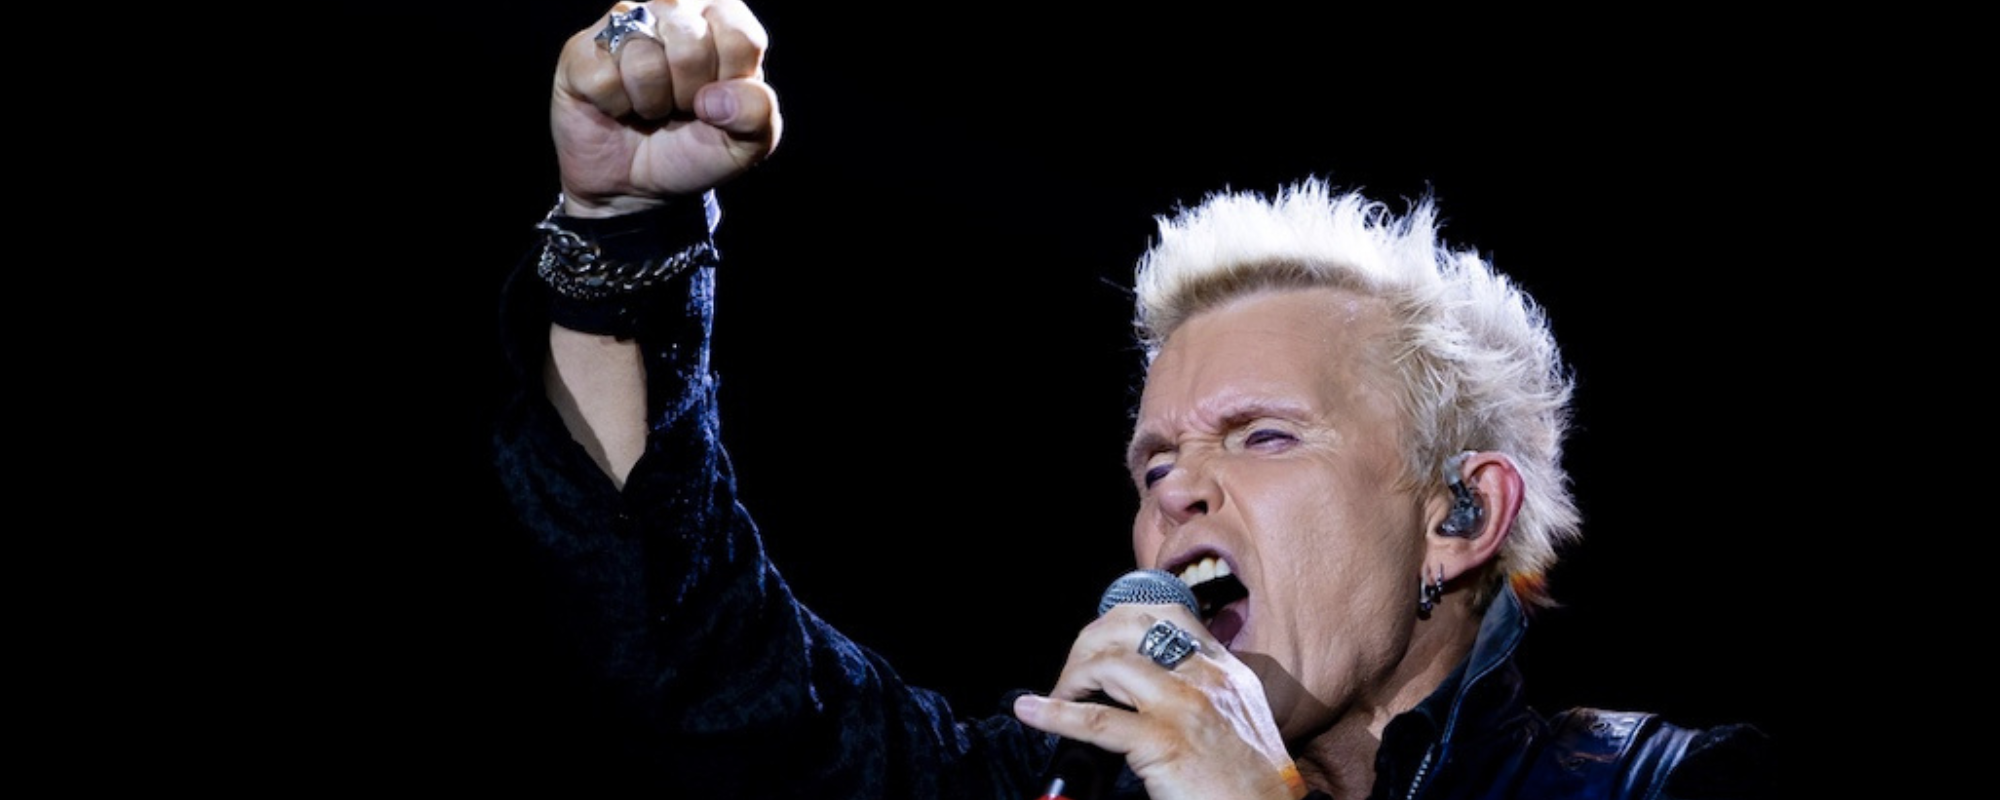 Billy Idol’s Historic Hoover Dam Performance Is Heading to Theaters